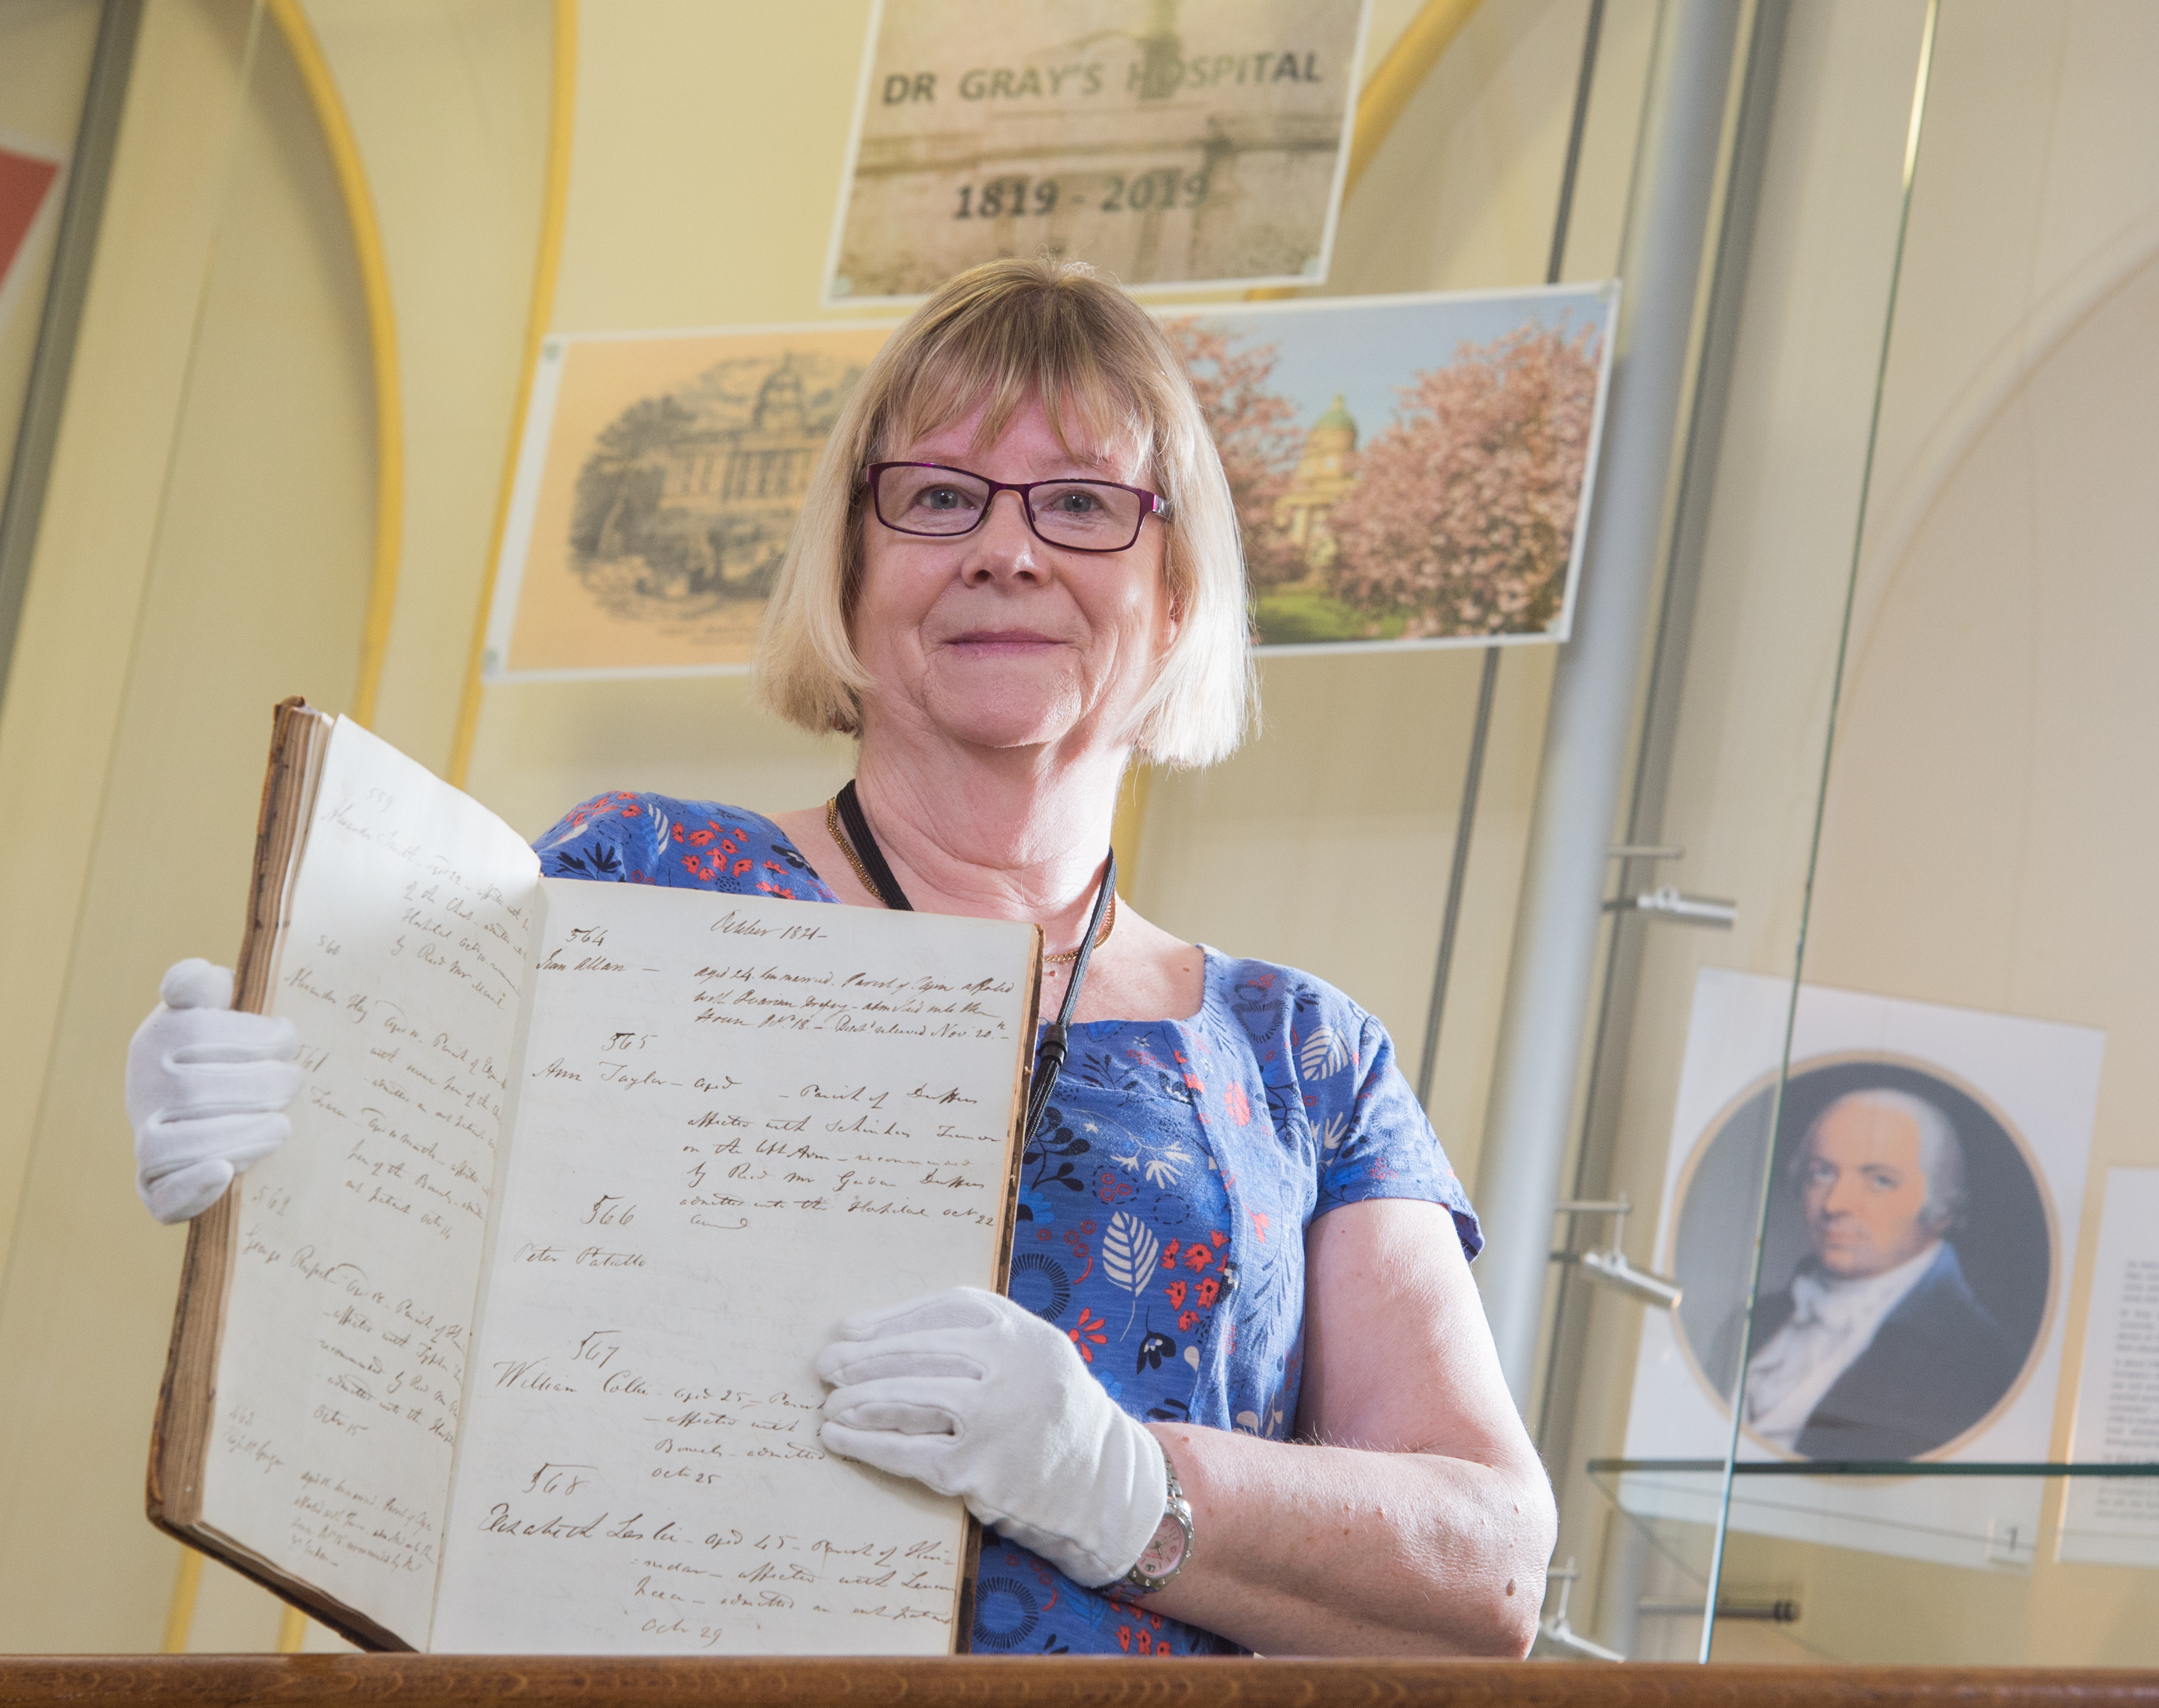 Elgin Museum Janie Mackenzie with the original admissions book for Dr Gray's Hospital from when it opened in 1819.